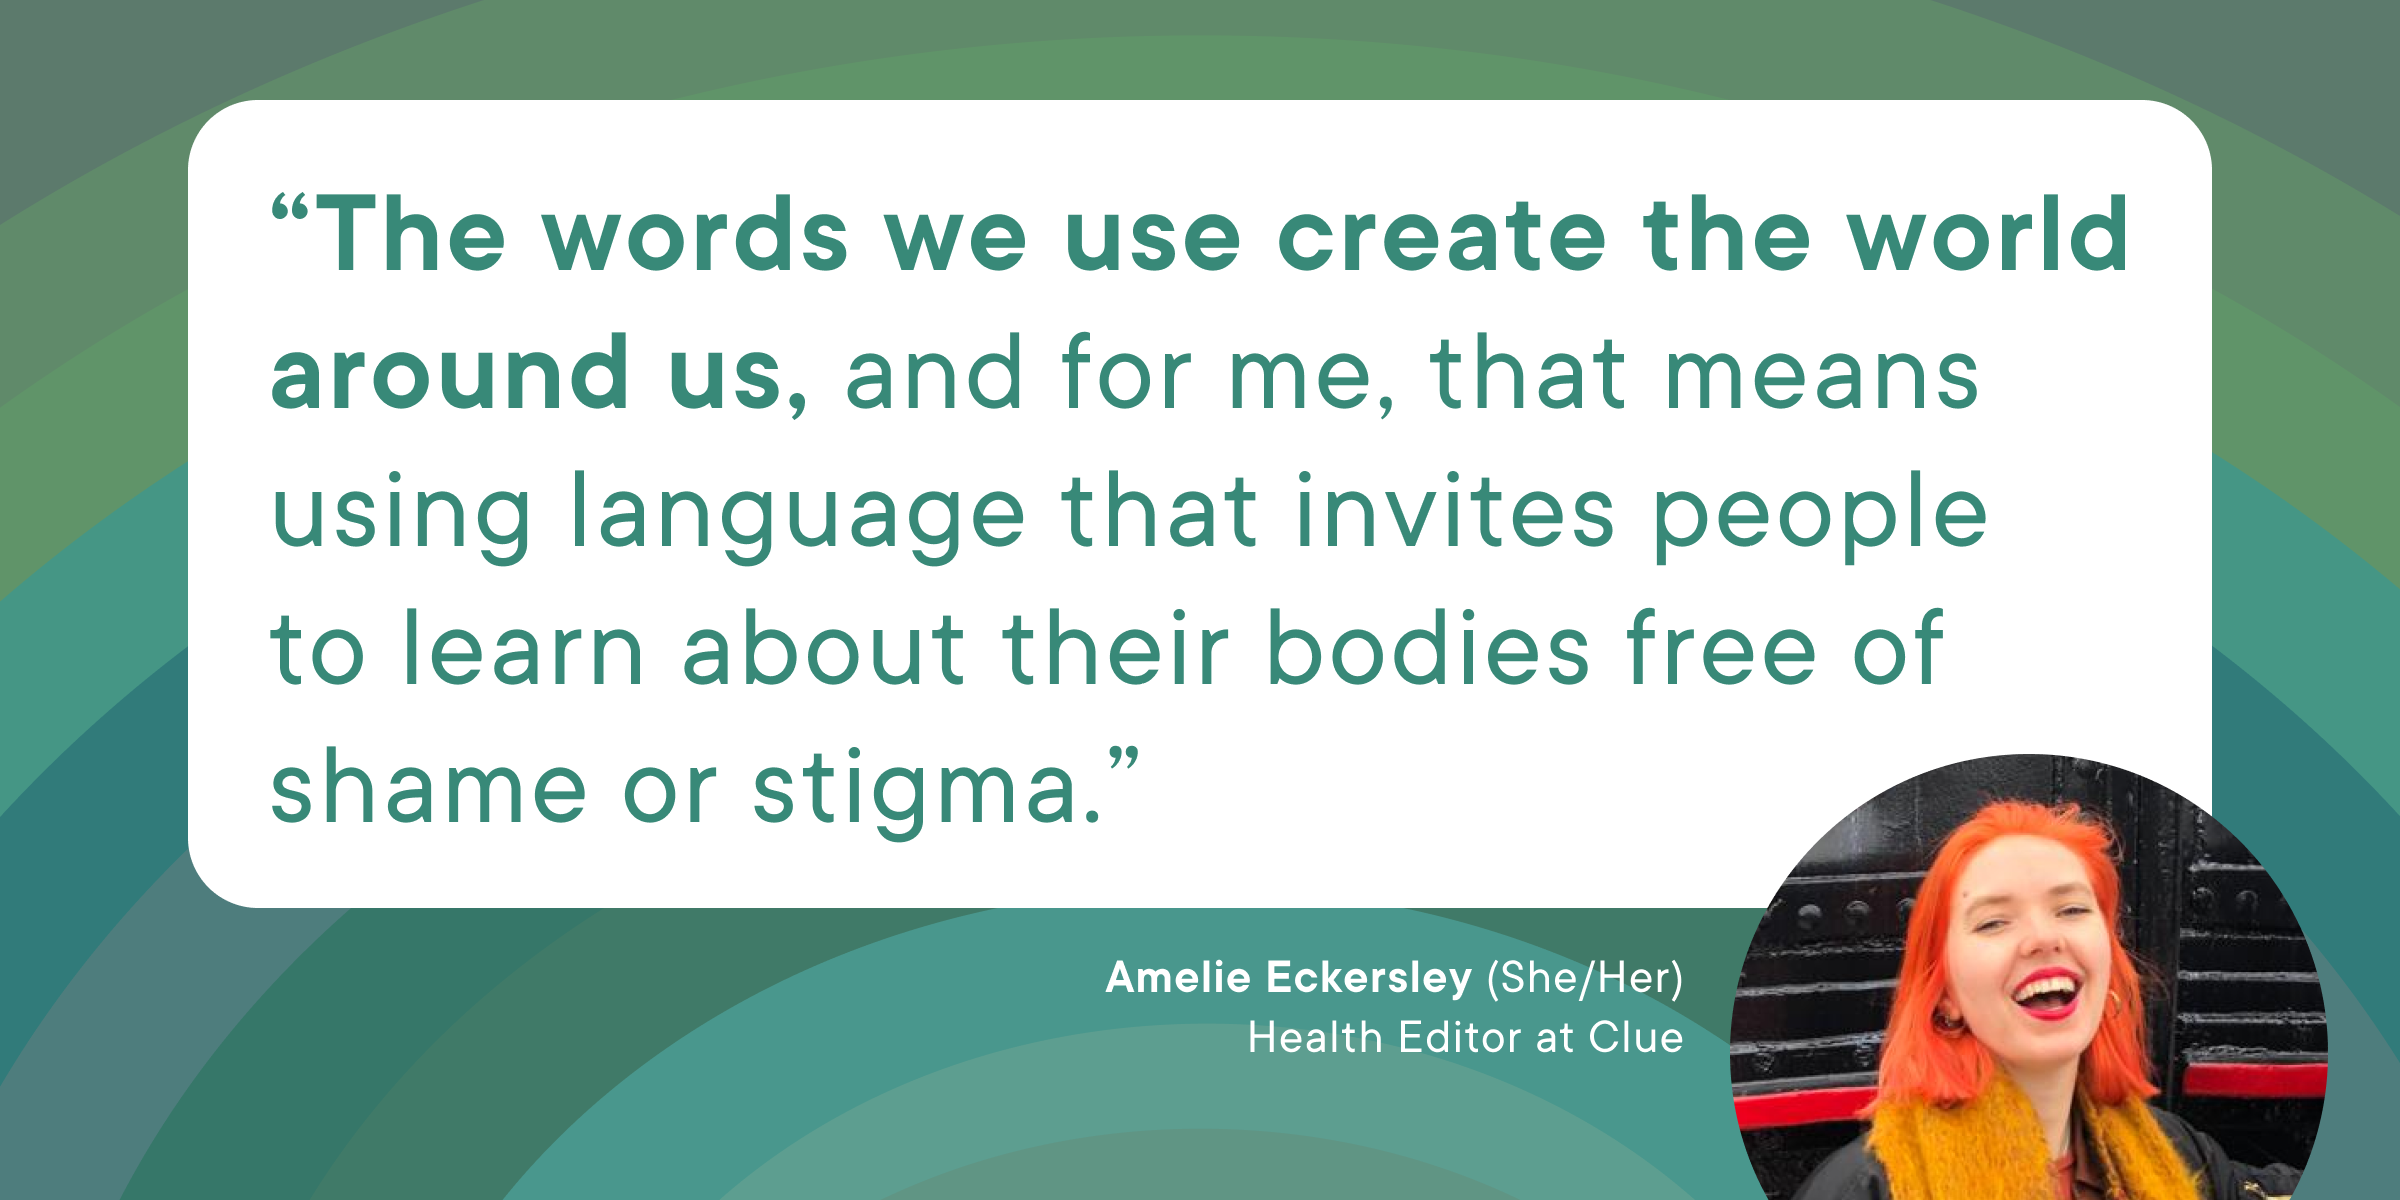 A quote from Clue employee Amelie: "The words we use create the world around us, and for me, that means using language that invites people to learn about their bodies free of shame or stigma."